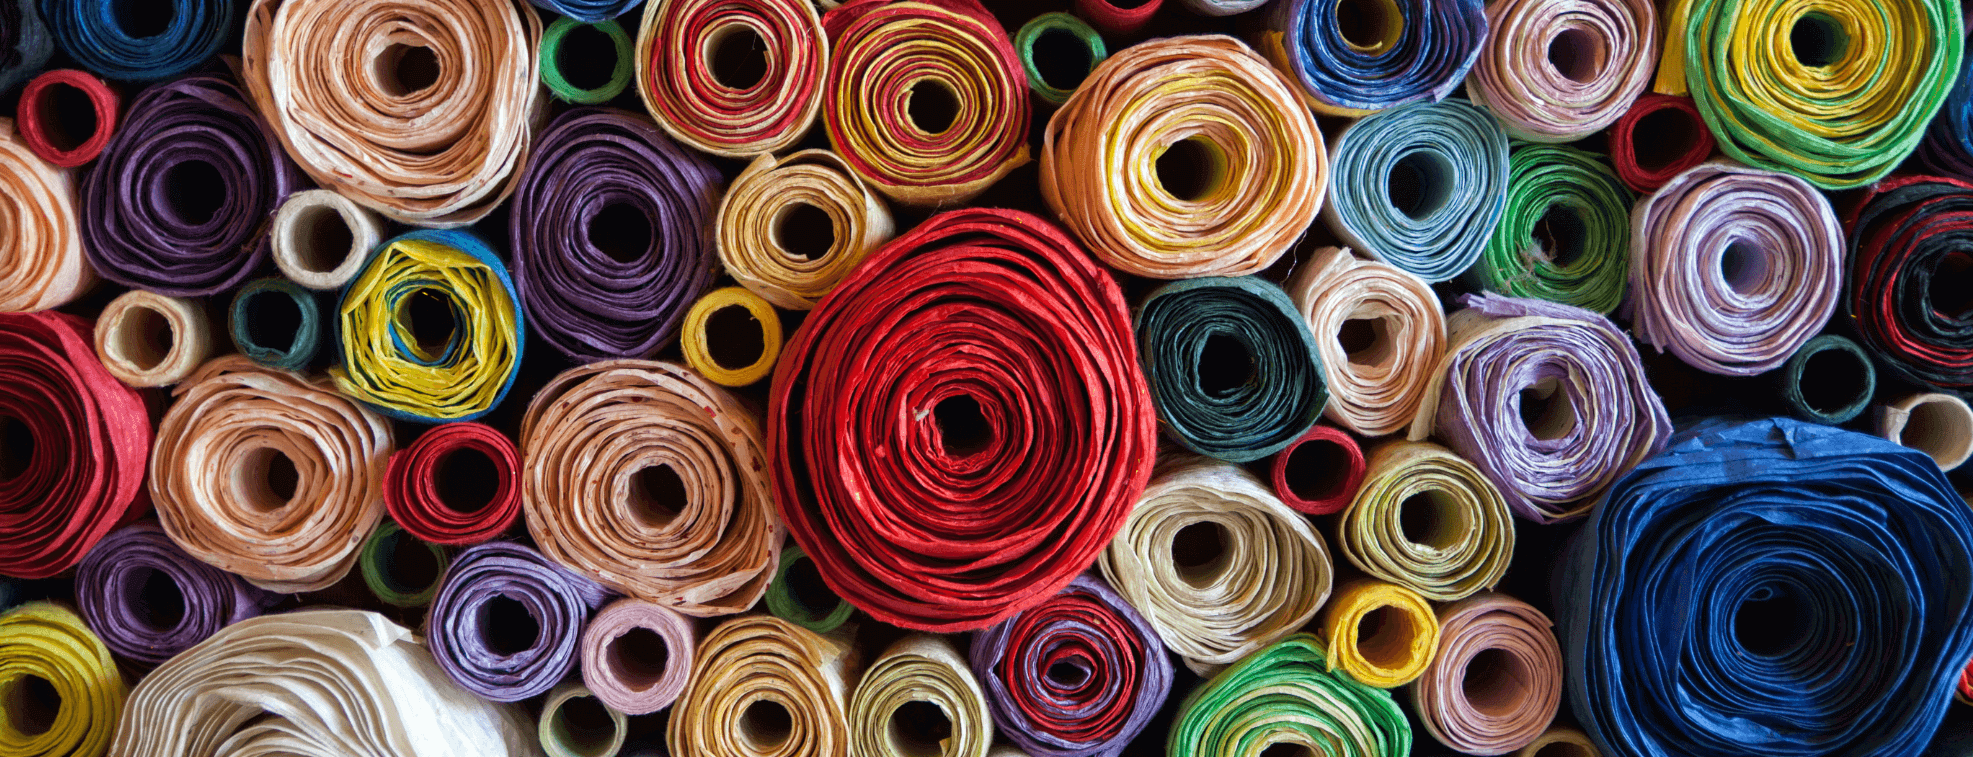 Rolls of different fabric types placed on each other